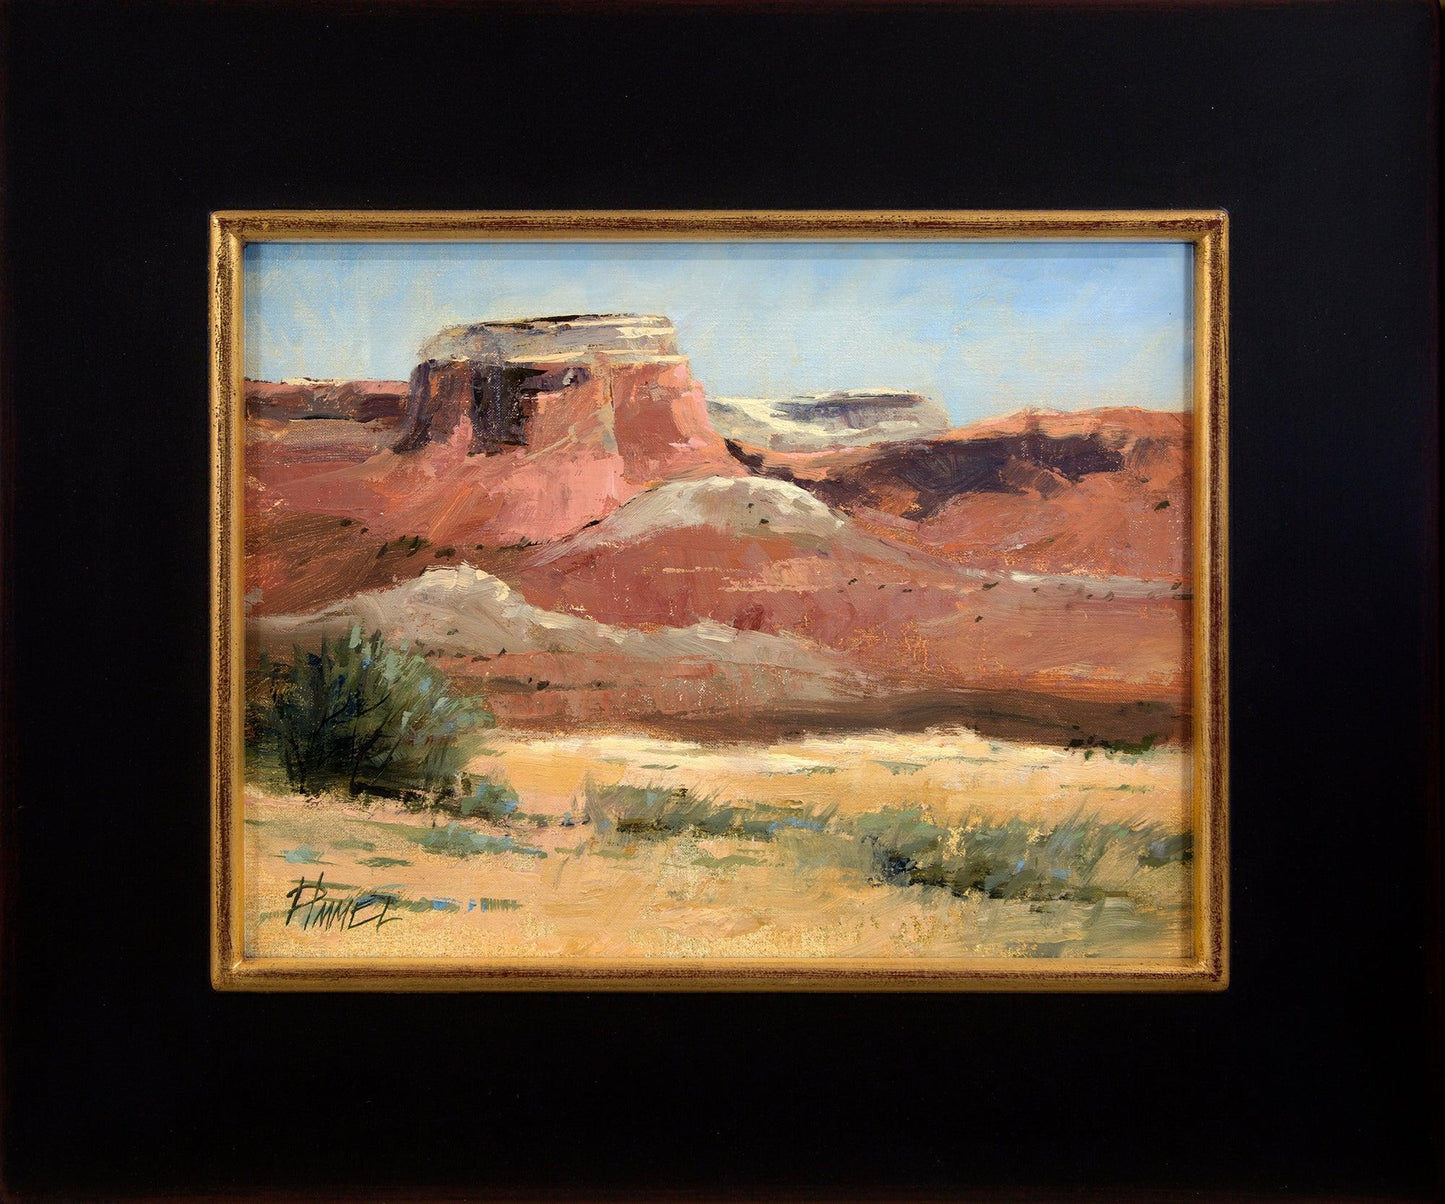 Under the Midday Sun, Ghost Ranch-Painting-Peggy Immel-Sorrel Sky Gallery